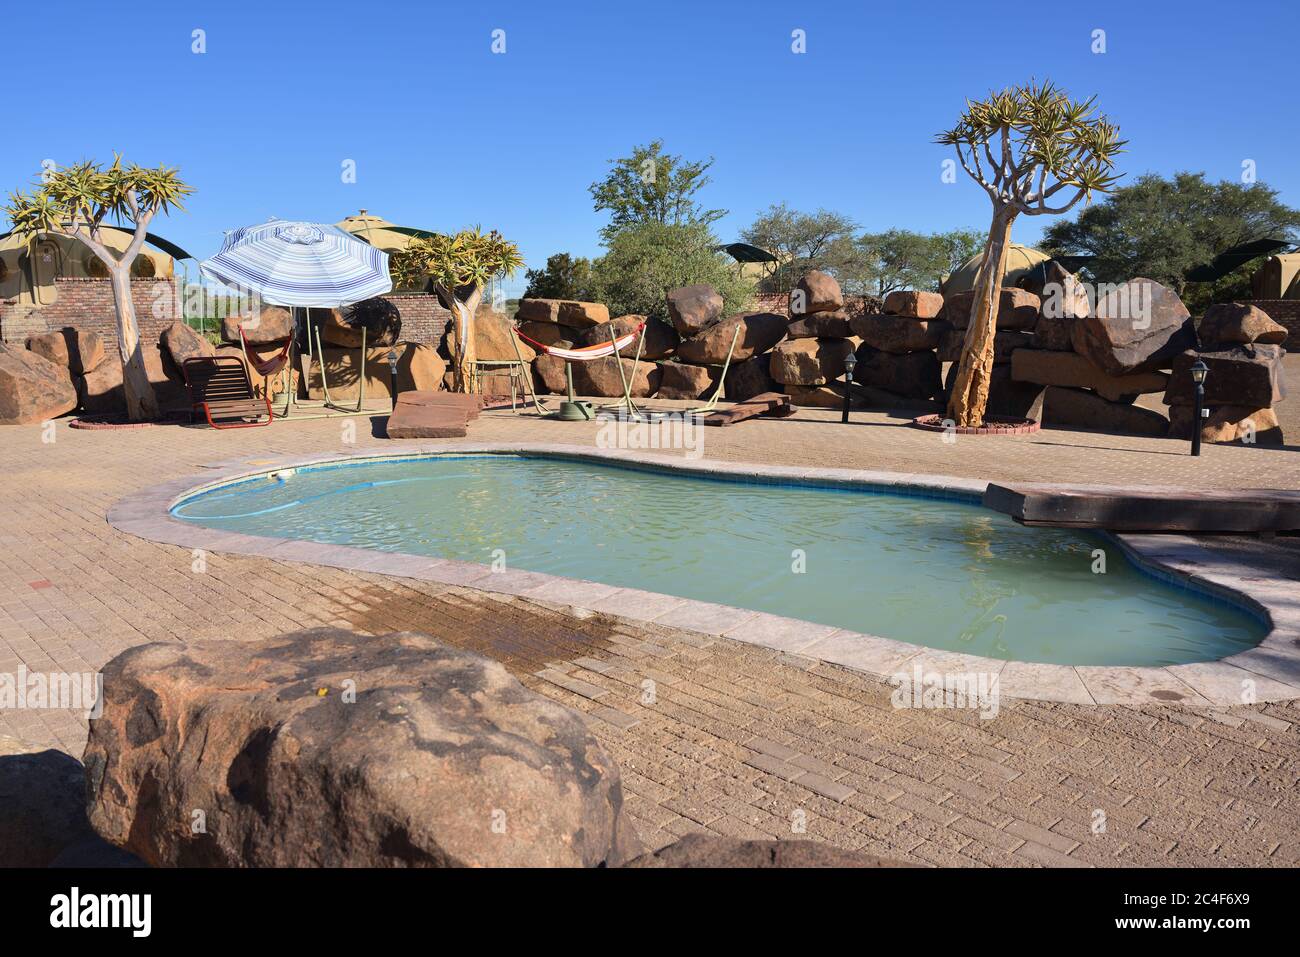 KEETMANSHOOP, NAMIBIA - JAN 25, 2016: Swimming pool in Quivertree Forest Rest Camp,  where visitors can explore the ancient and famous Quivertree Fore Stock Photo